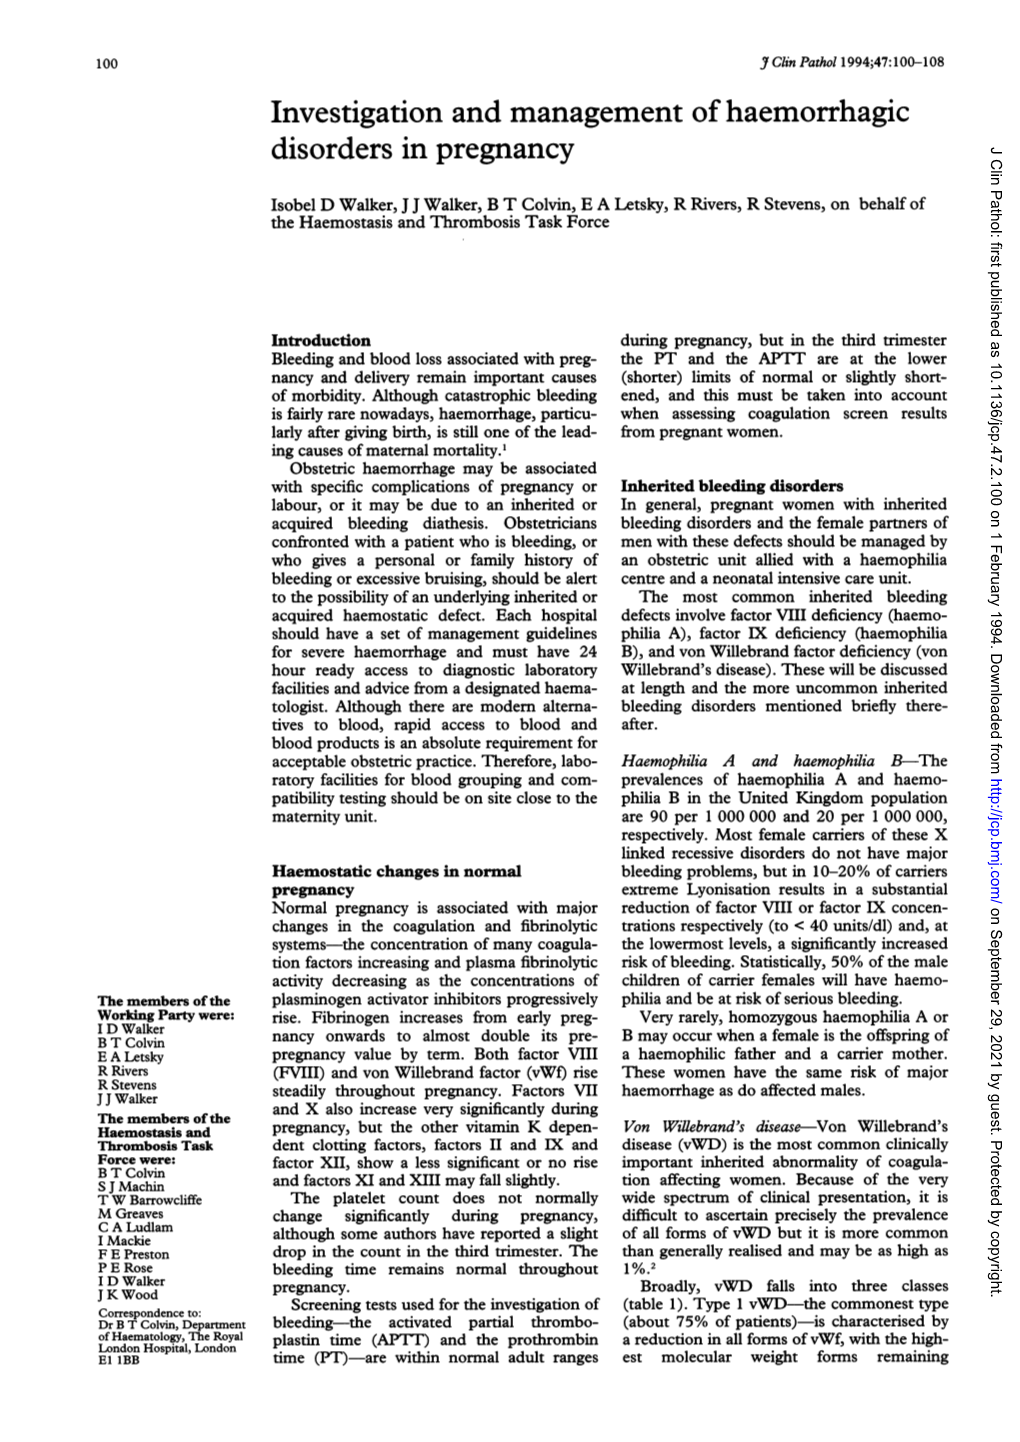 Investigation and Management of Haemorrhagic Disorders in Pregnancy J Clin Pathol: First Published As 10.1136/Jcp.47.2.100 on 1 February 1994